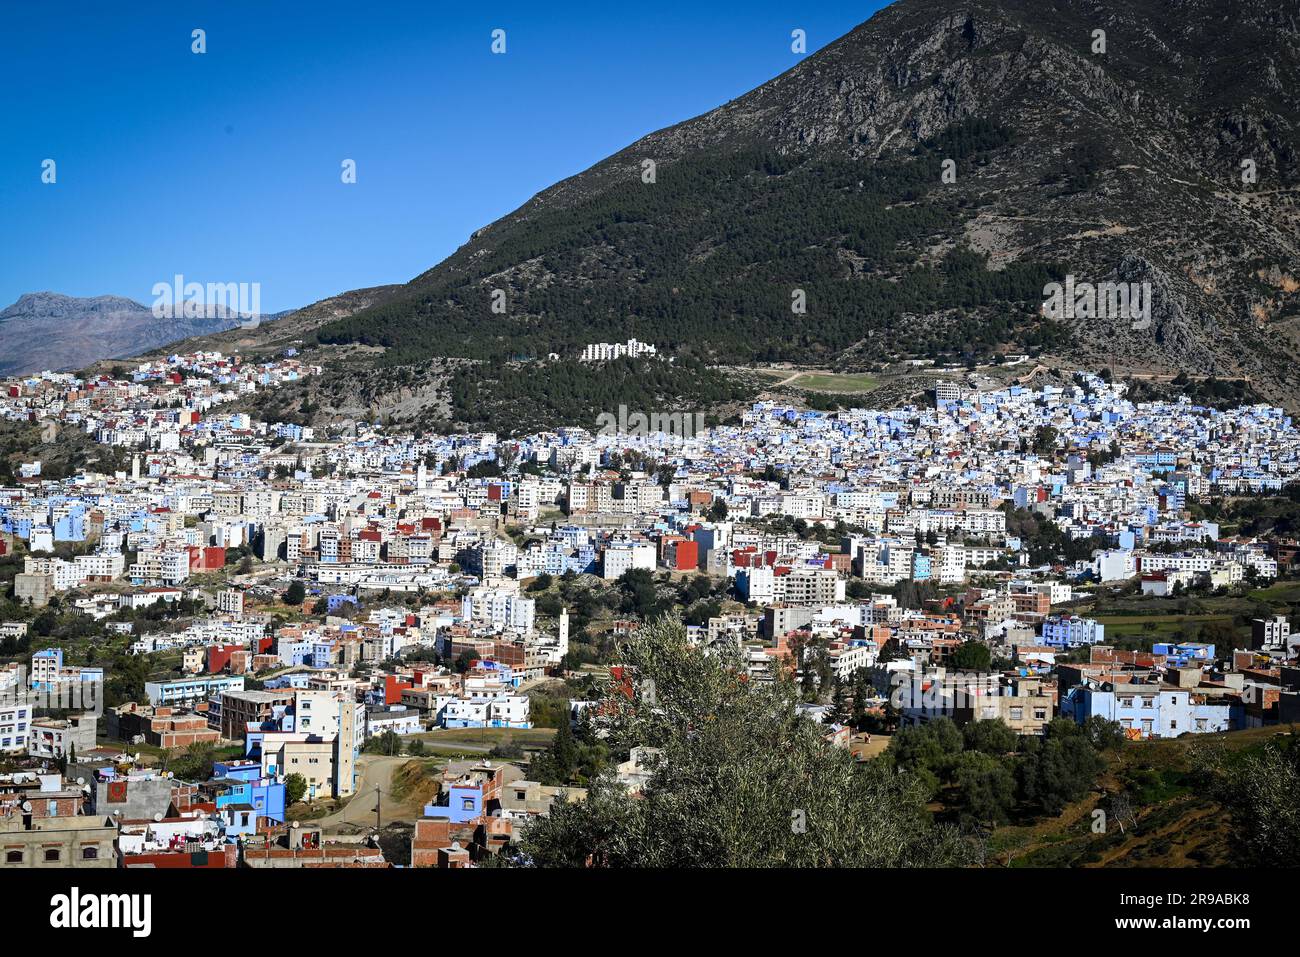 Upon the entrance to Chefchaouen, Morocco, an overlook area affords great views of the Blue City which was founded in 1471 in the Riff mountains Stock Photo